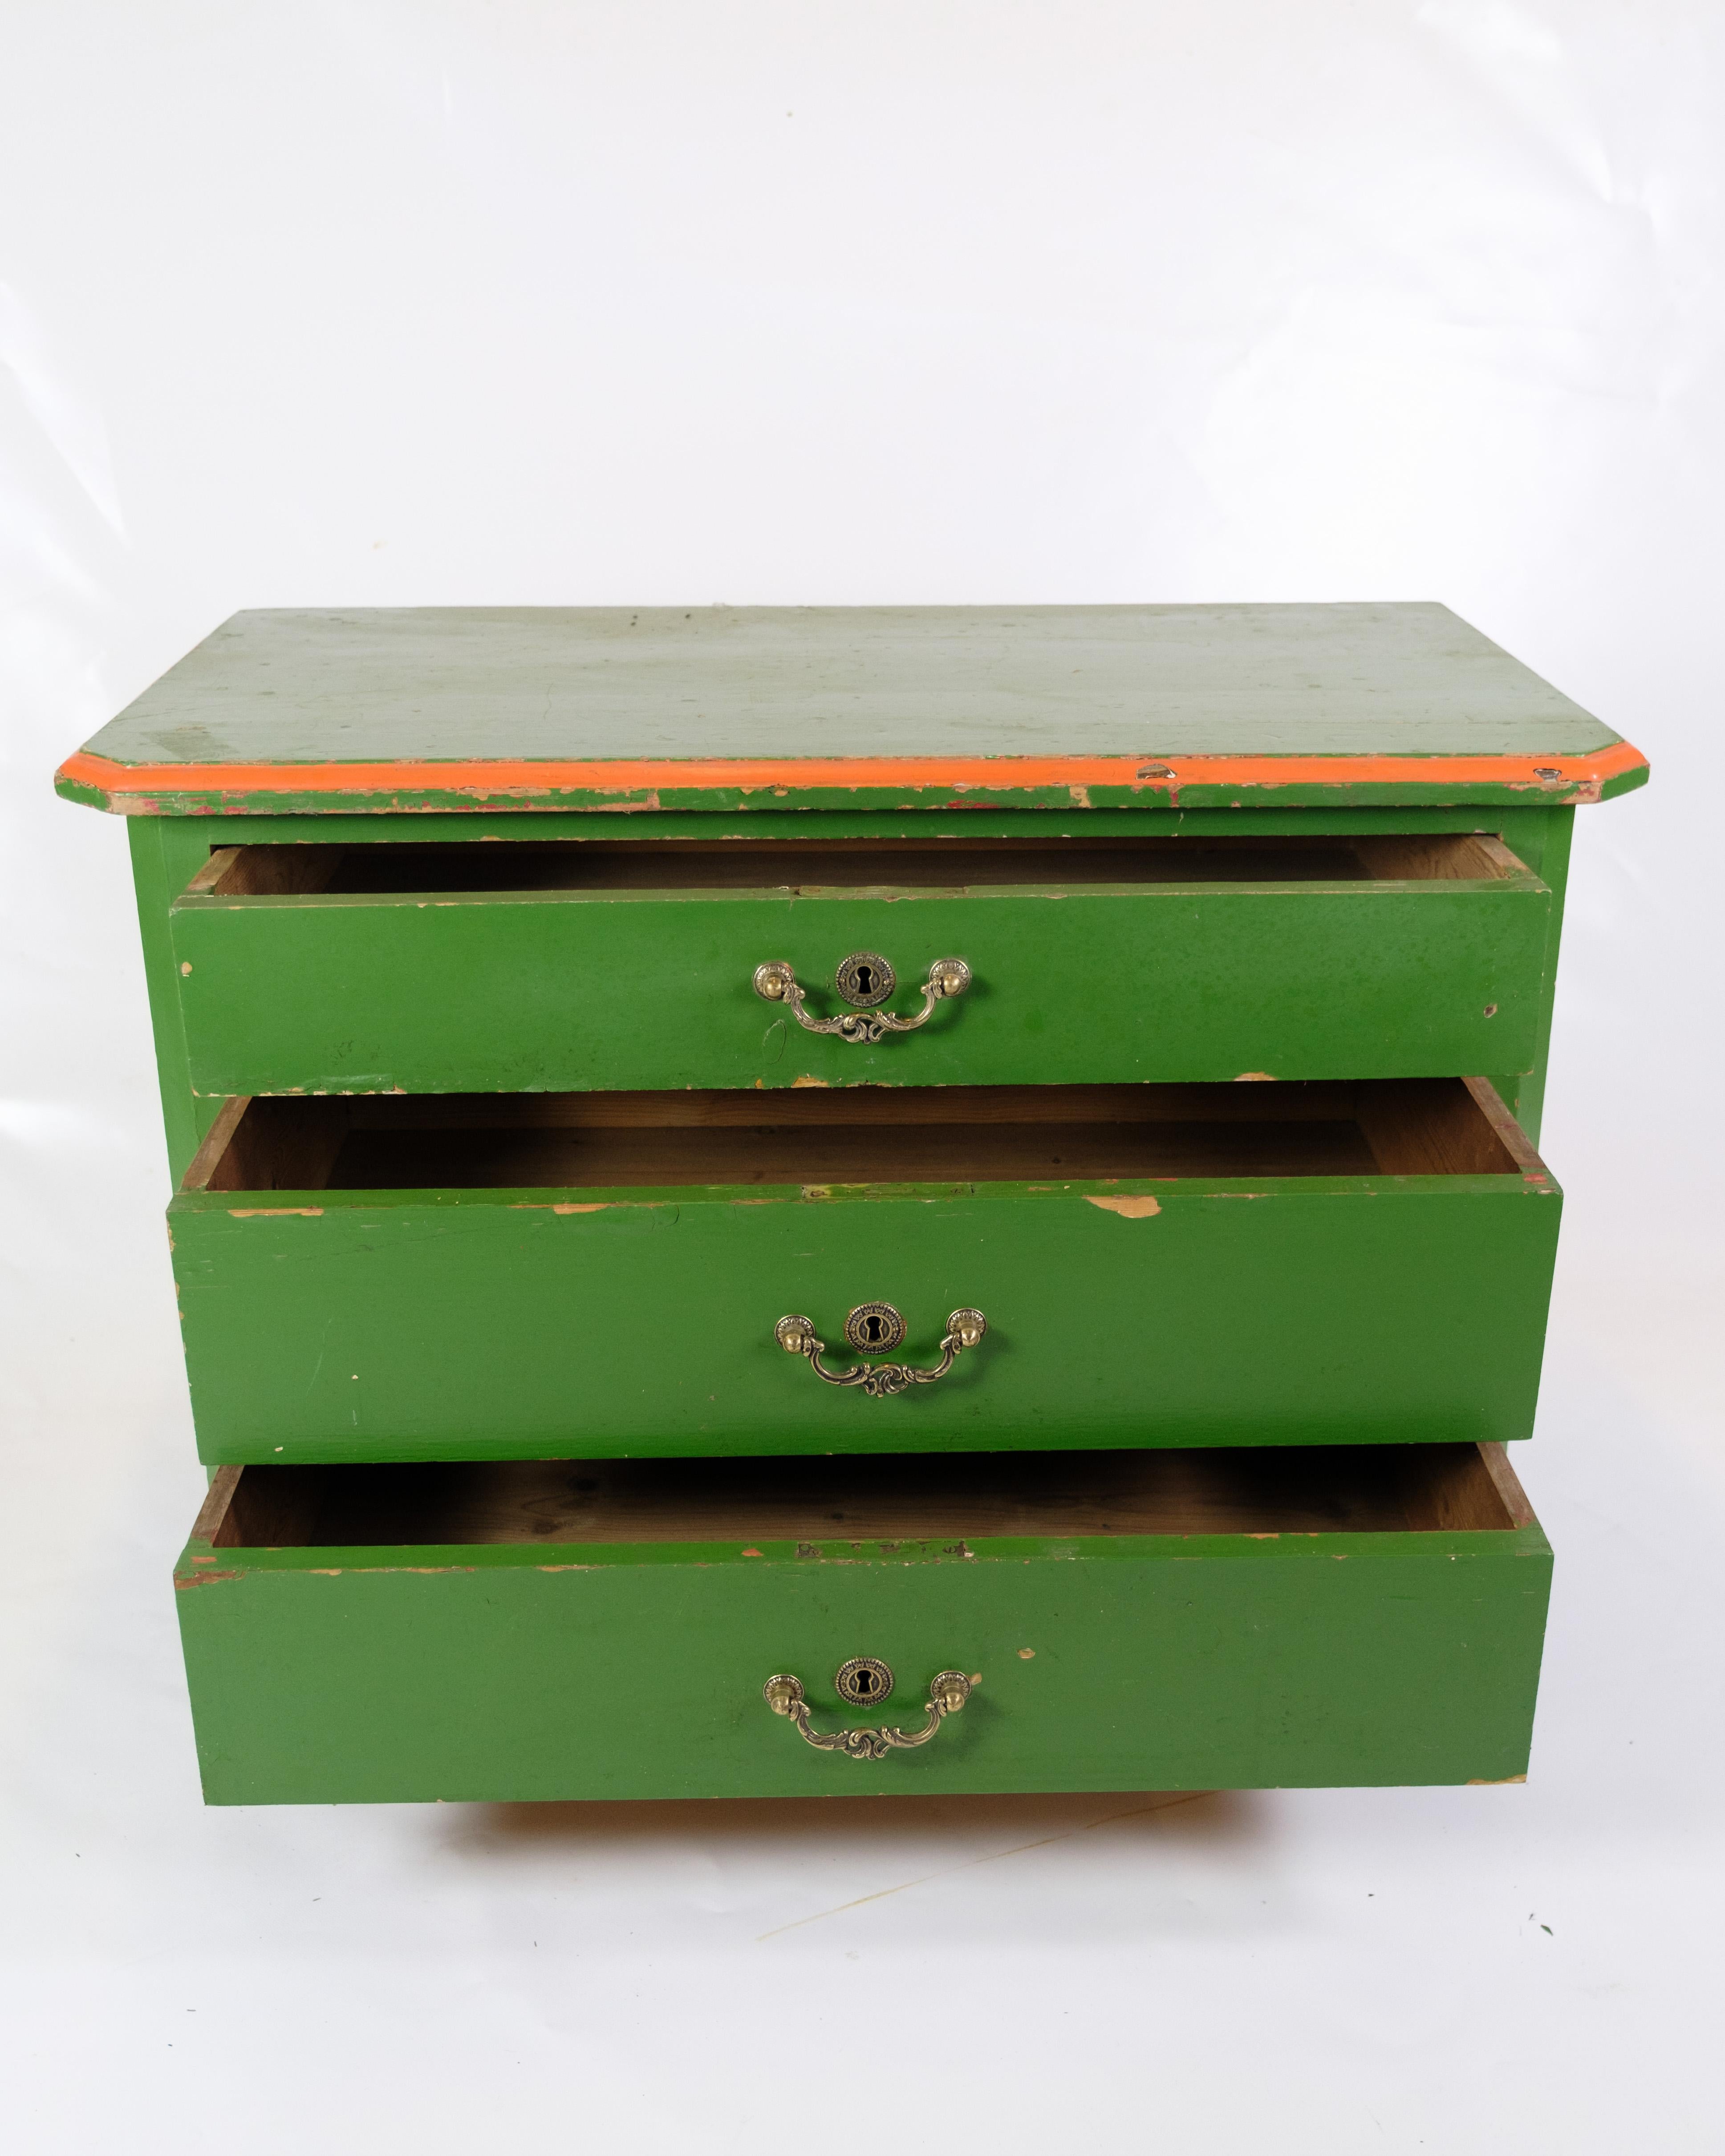 Late 19th Century Small Antique Chest Of Drawers Painted In Green With Red Edges From 1890s For Sale